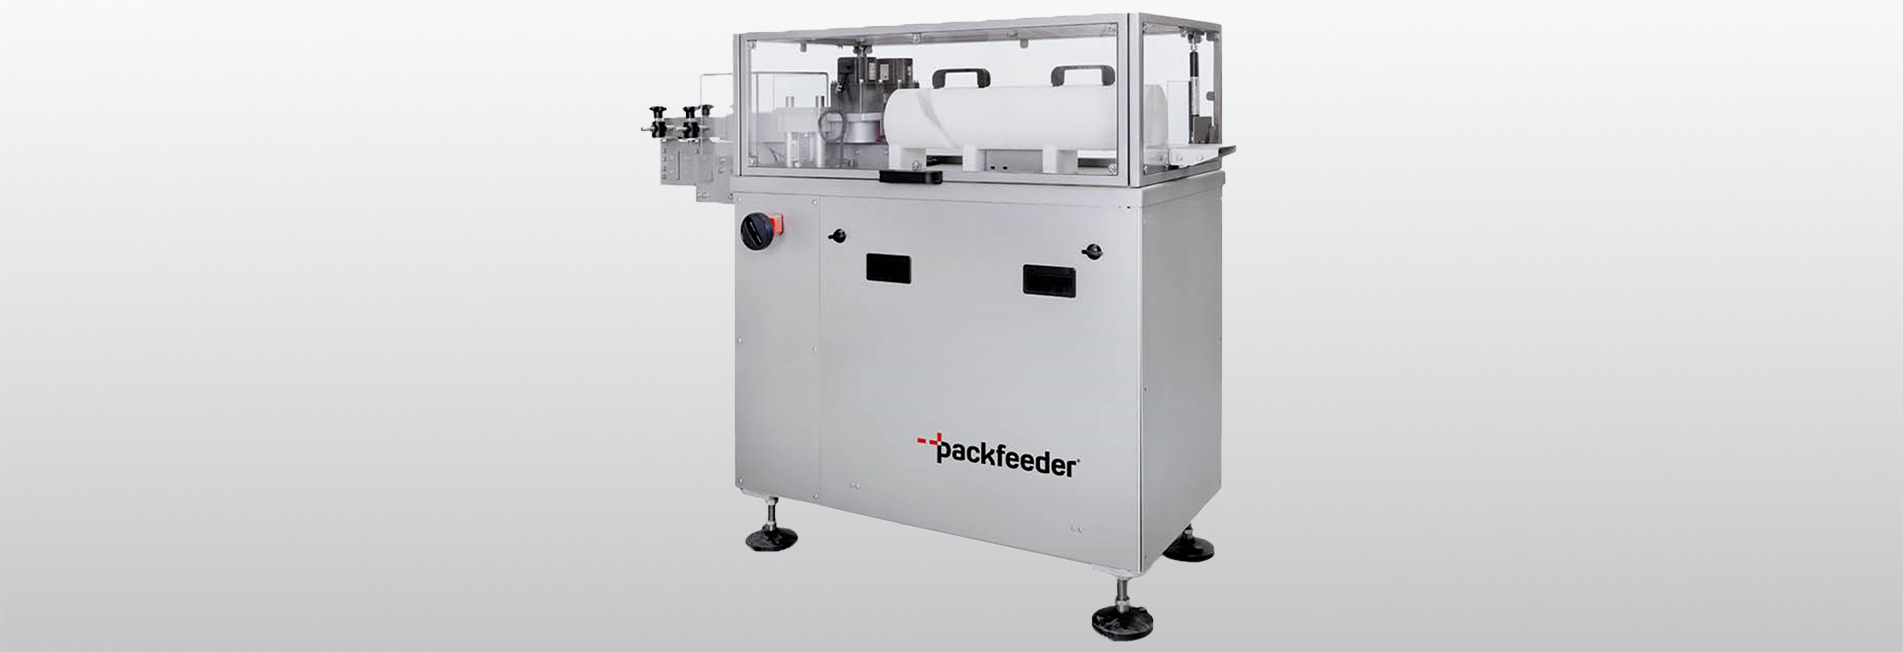 Rotzinger Group - Packfeeder's bottle cleaning solution